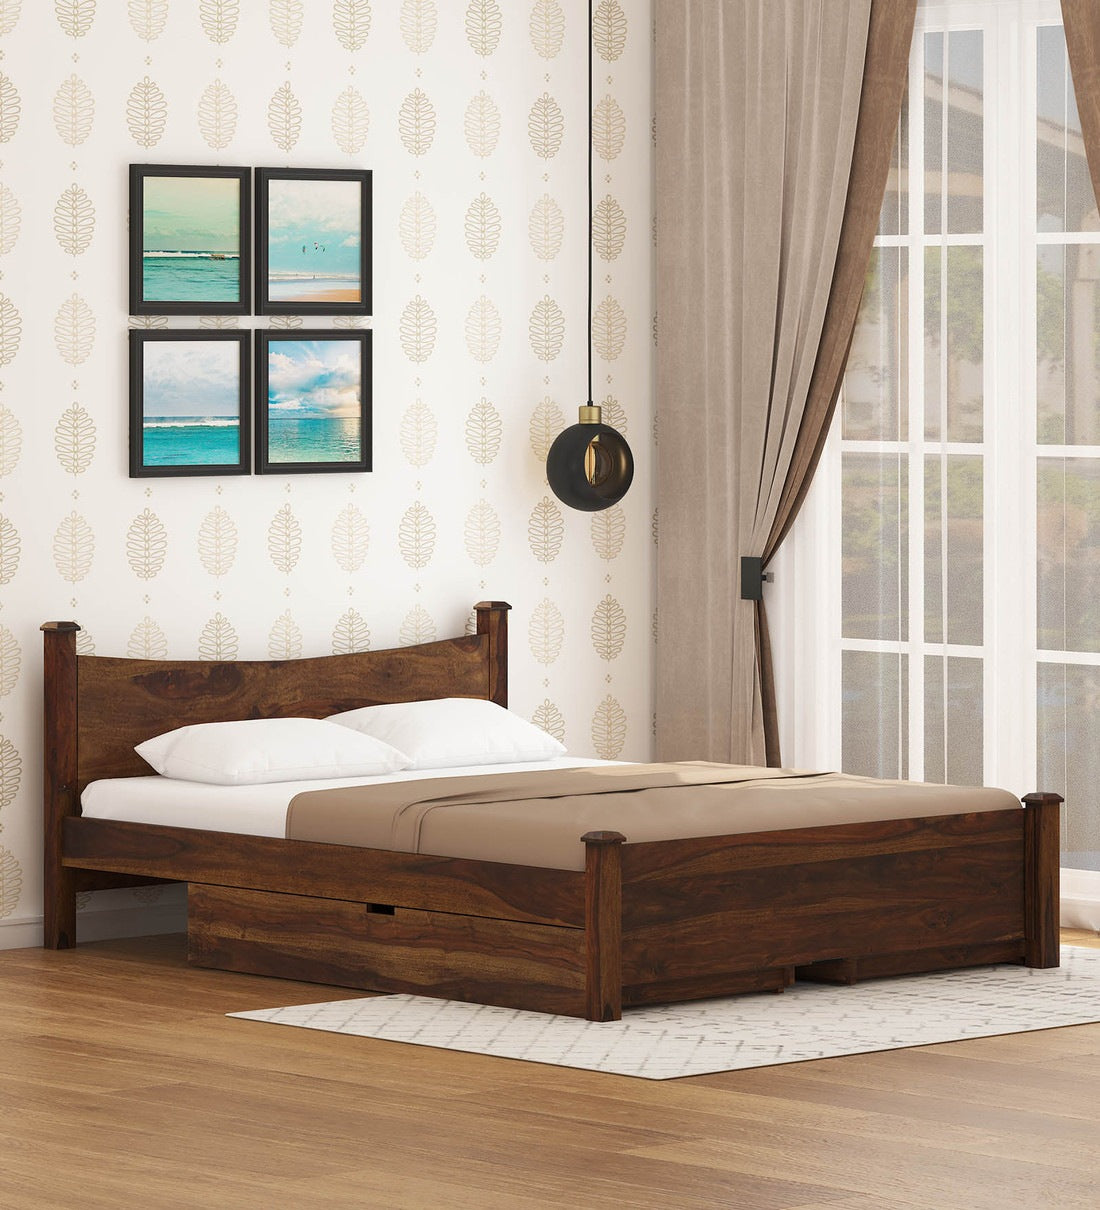 Polo Solid Wood Bed With Drawer Storage For Bedroom in Provincial Teak Finish - Rajwada Furnish